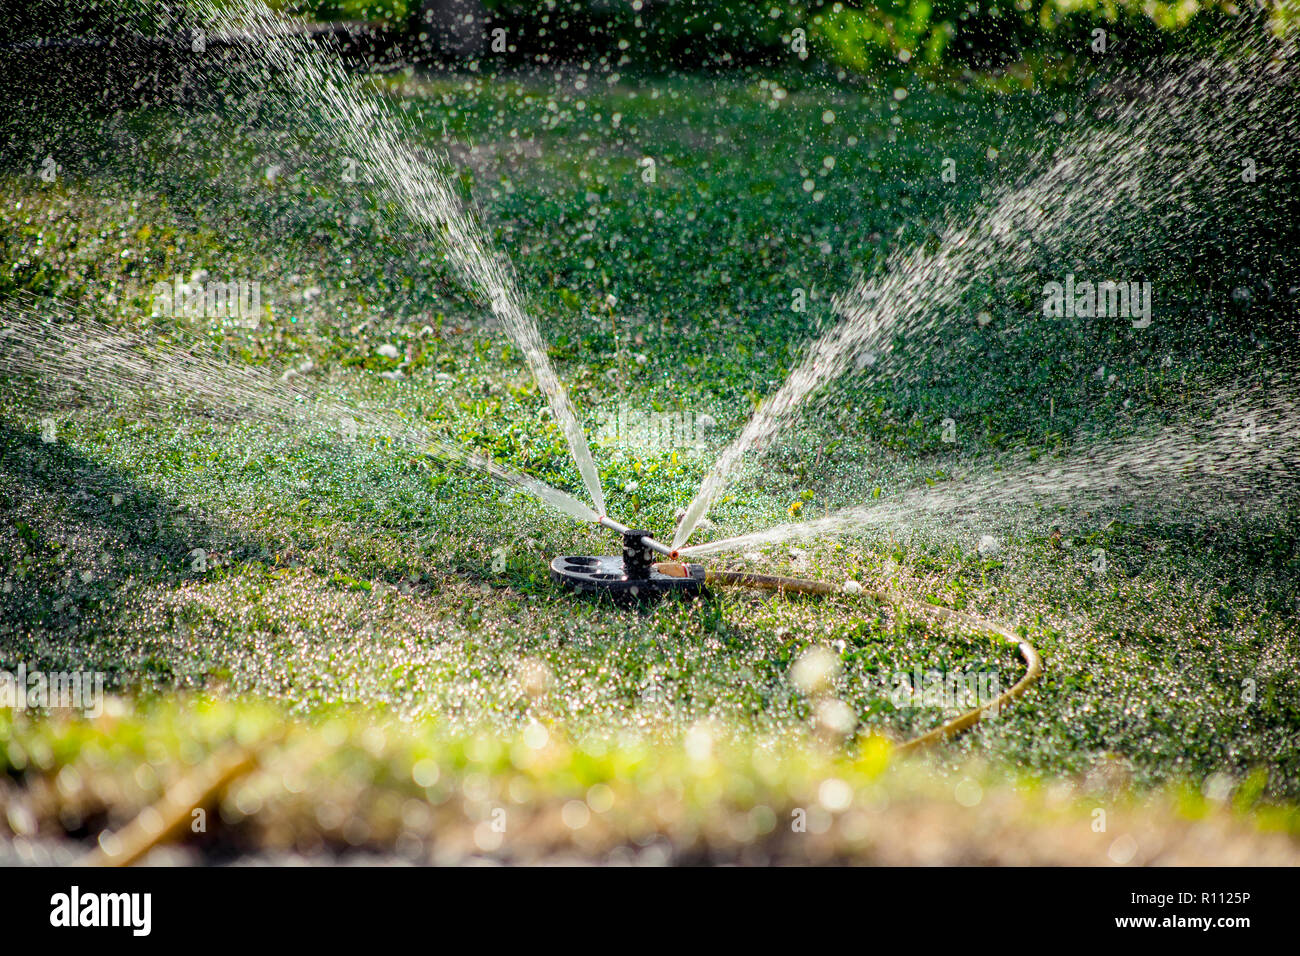 Irrigation sprinkler device for irrigation of lawns, watering grass in summer during drought. Stock Photo